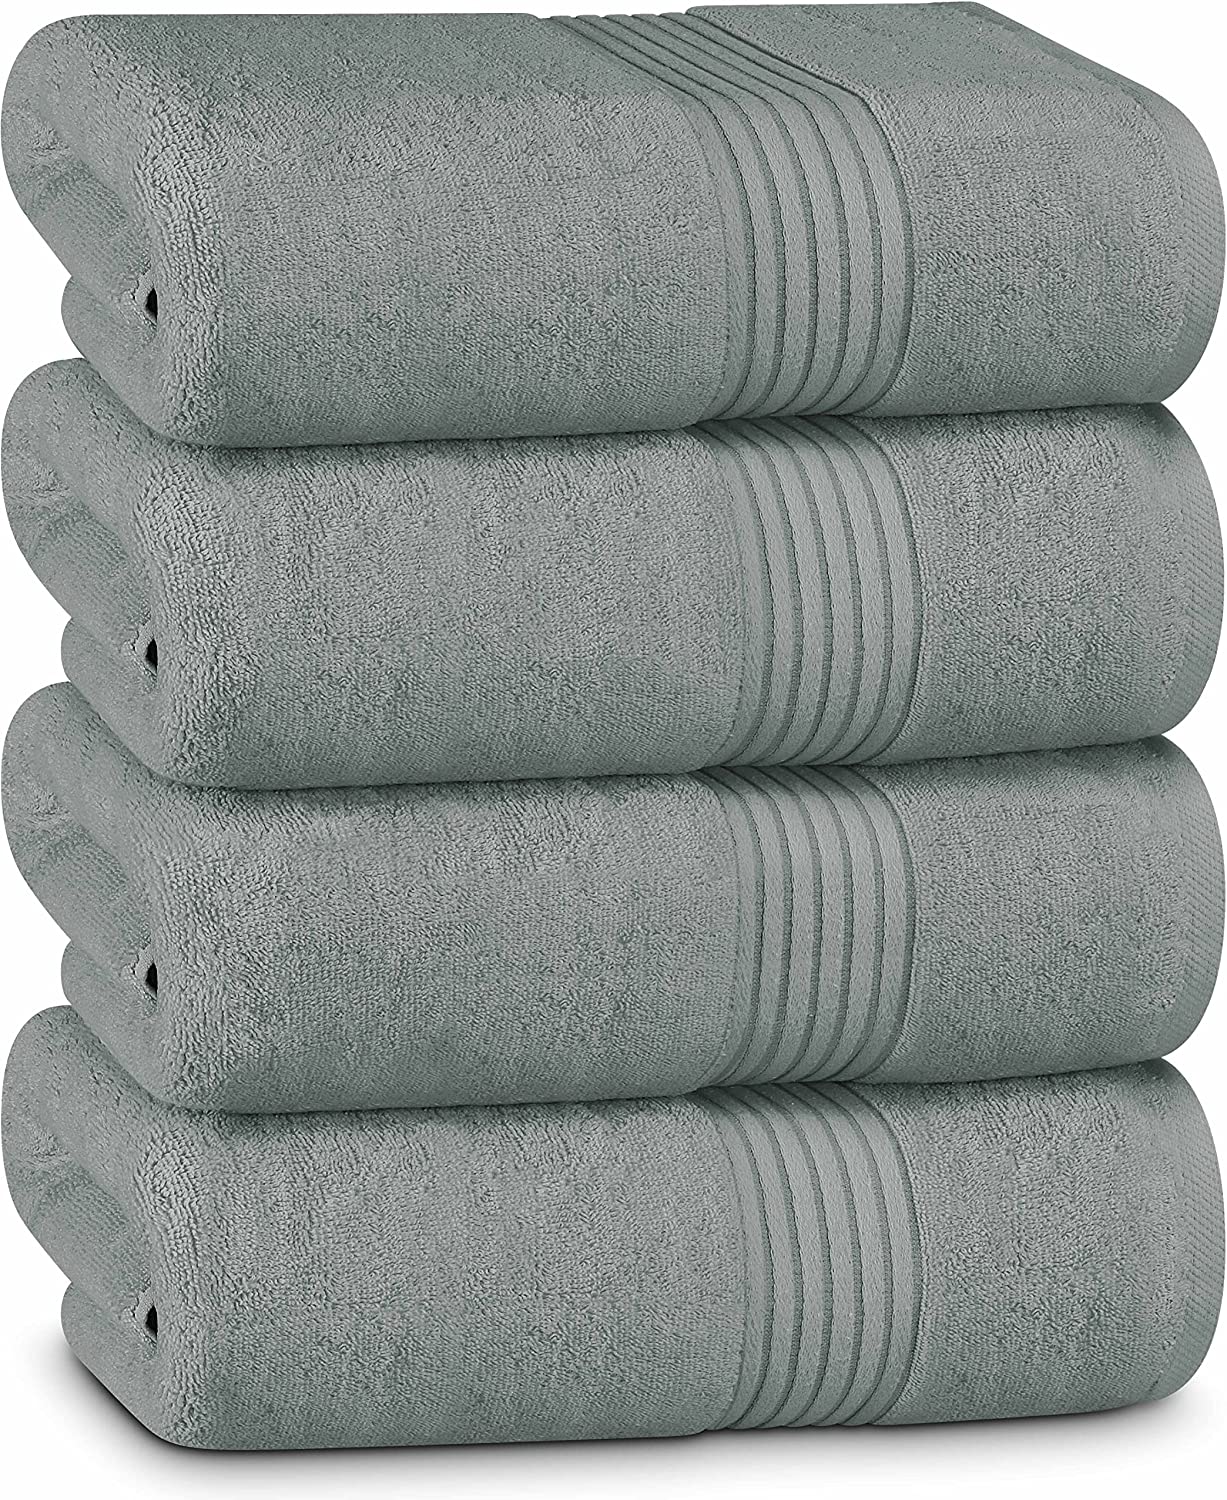 Utopia Towels 4 Piece Hand Towels Set, (16 x 28 inches) 100% Ring Spun  Cotton, L